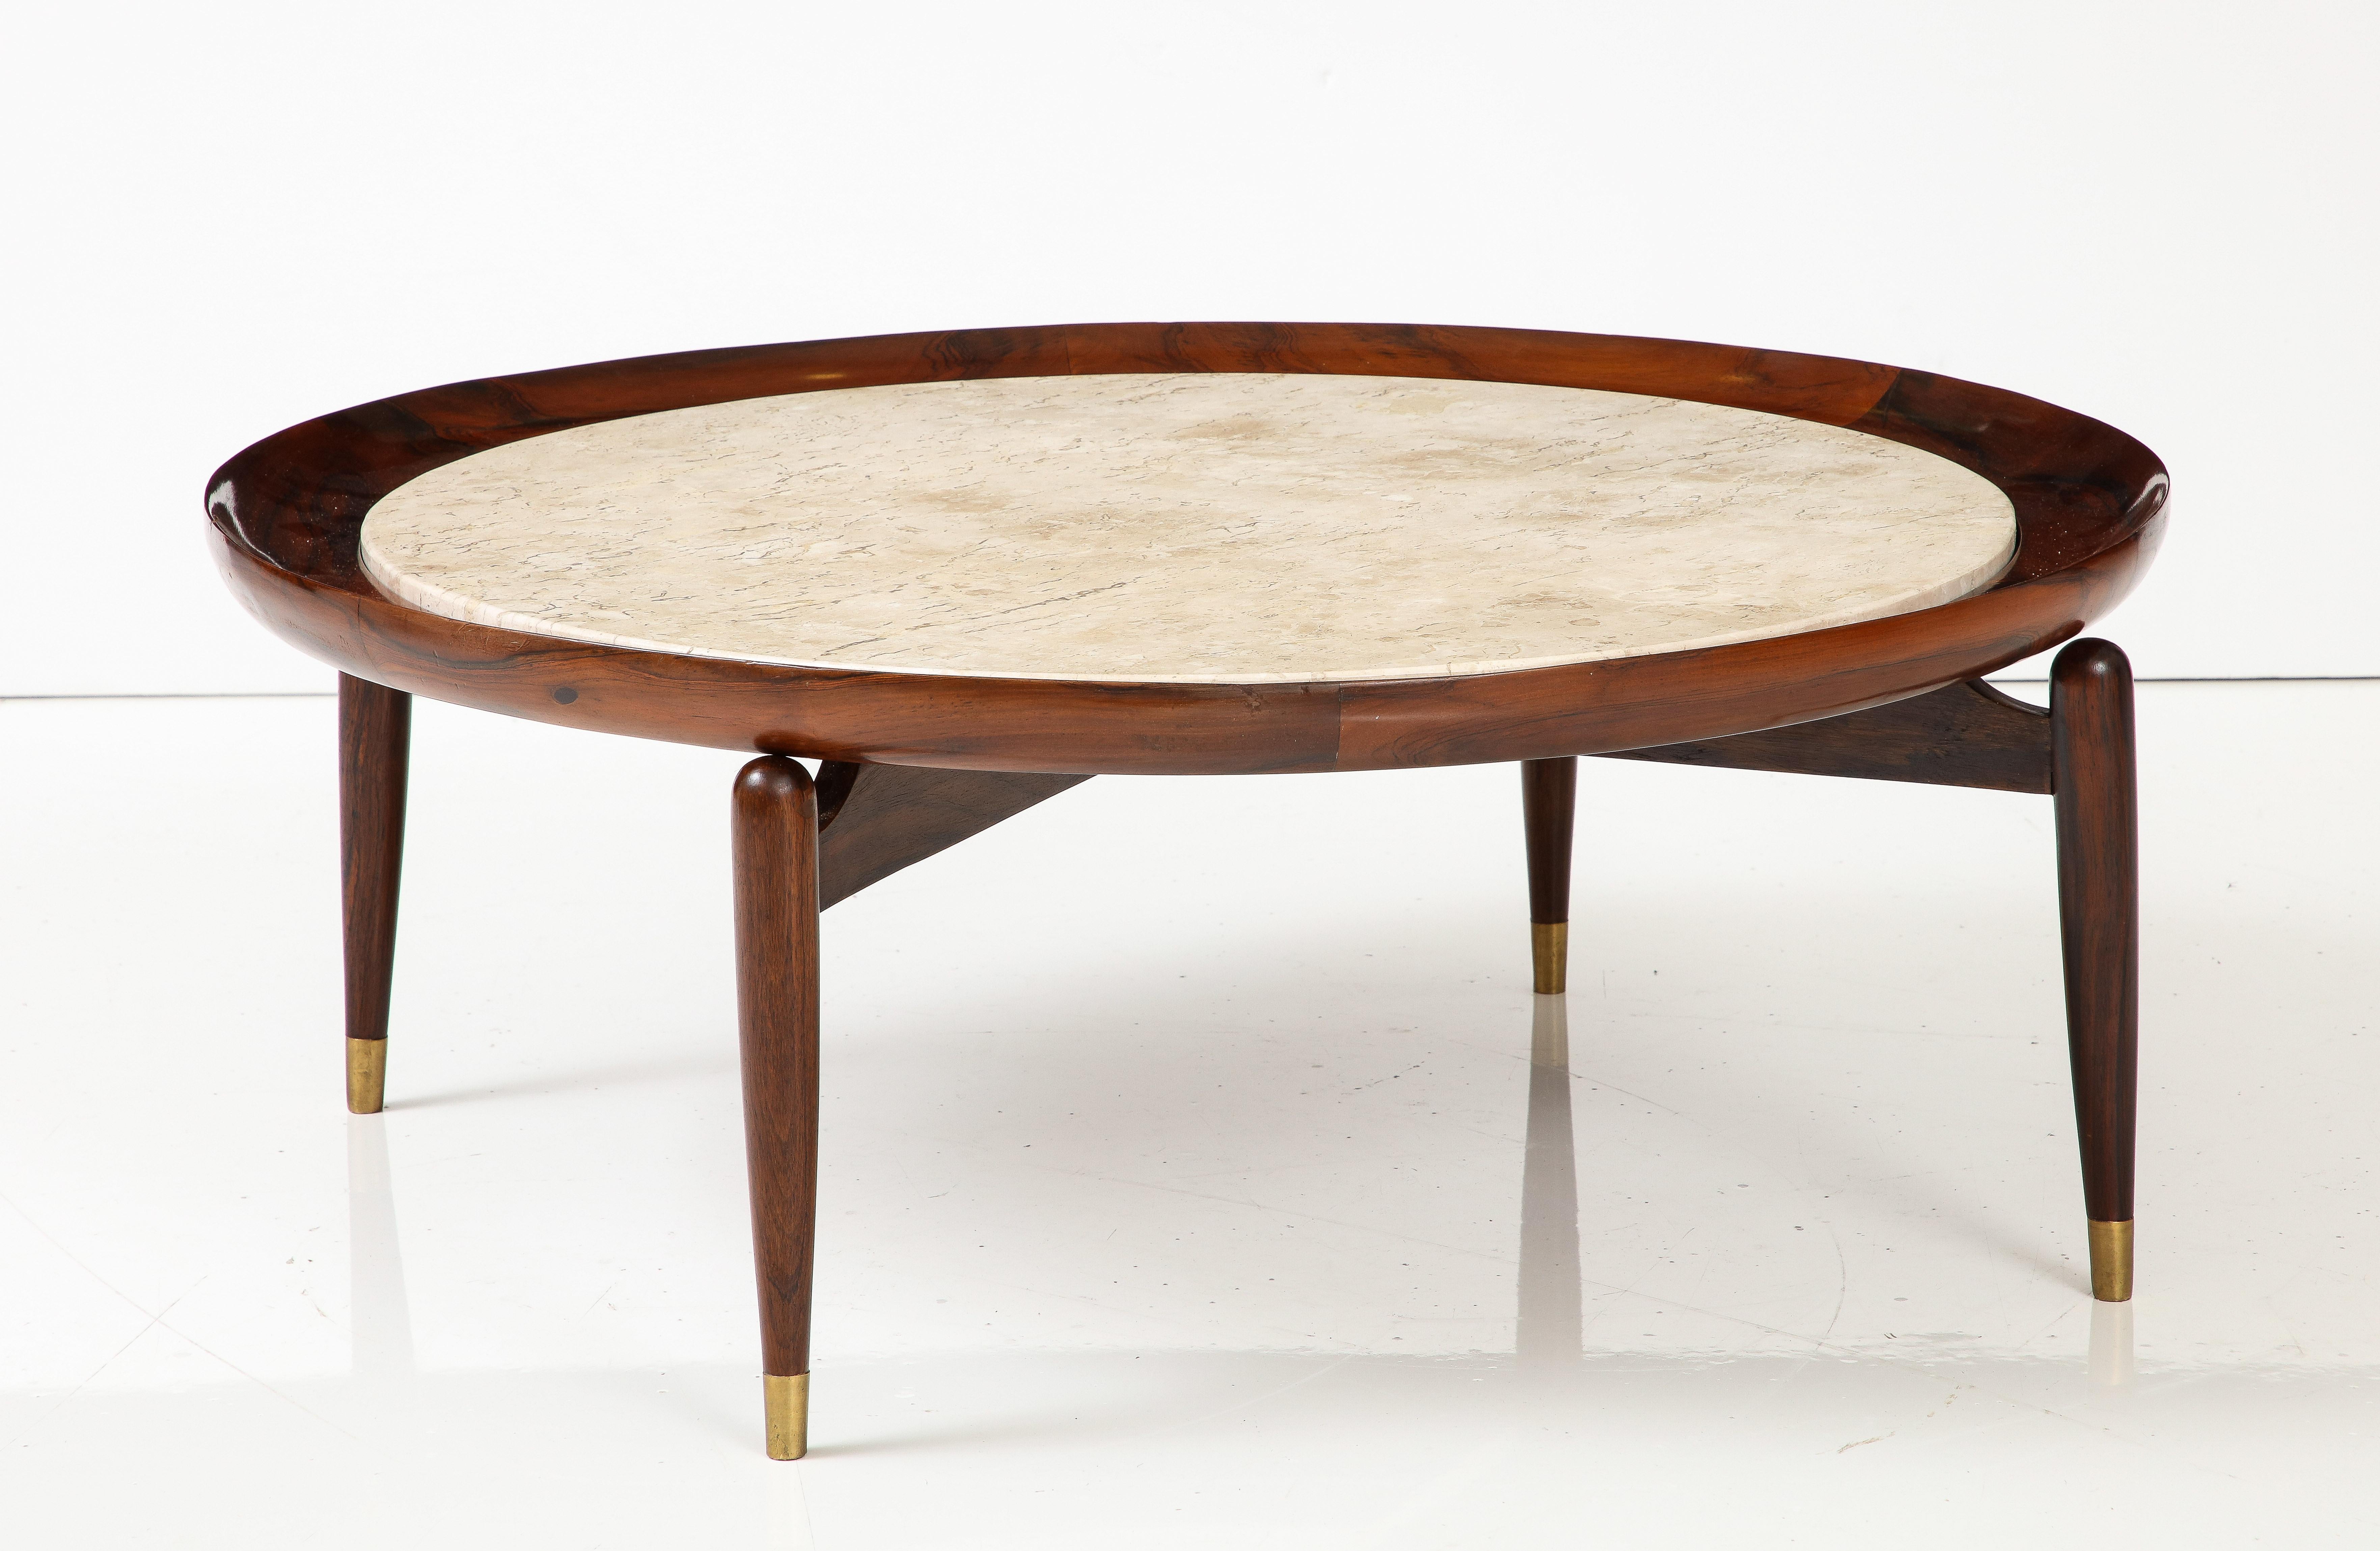 Varnished Mid-Century Modern Marble Top Center Table by Giuseppe Scapinelli, Brazil, 1950s